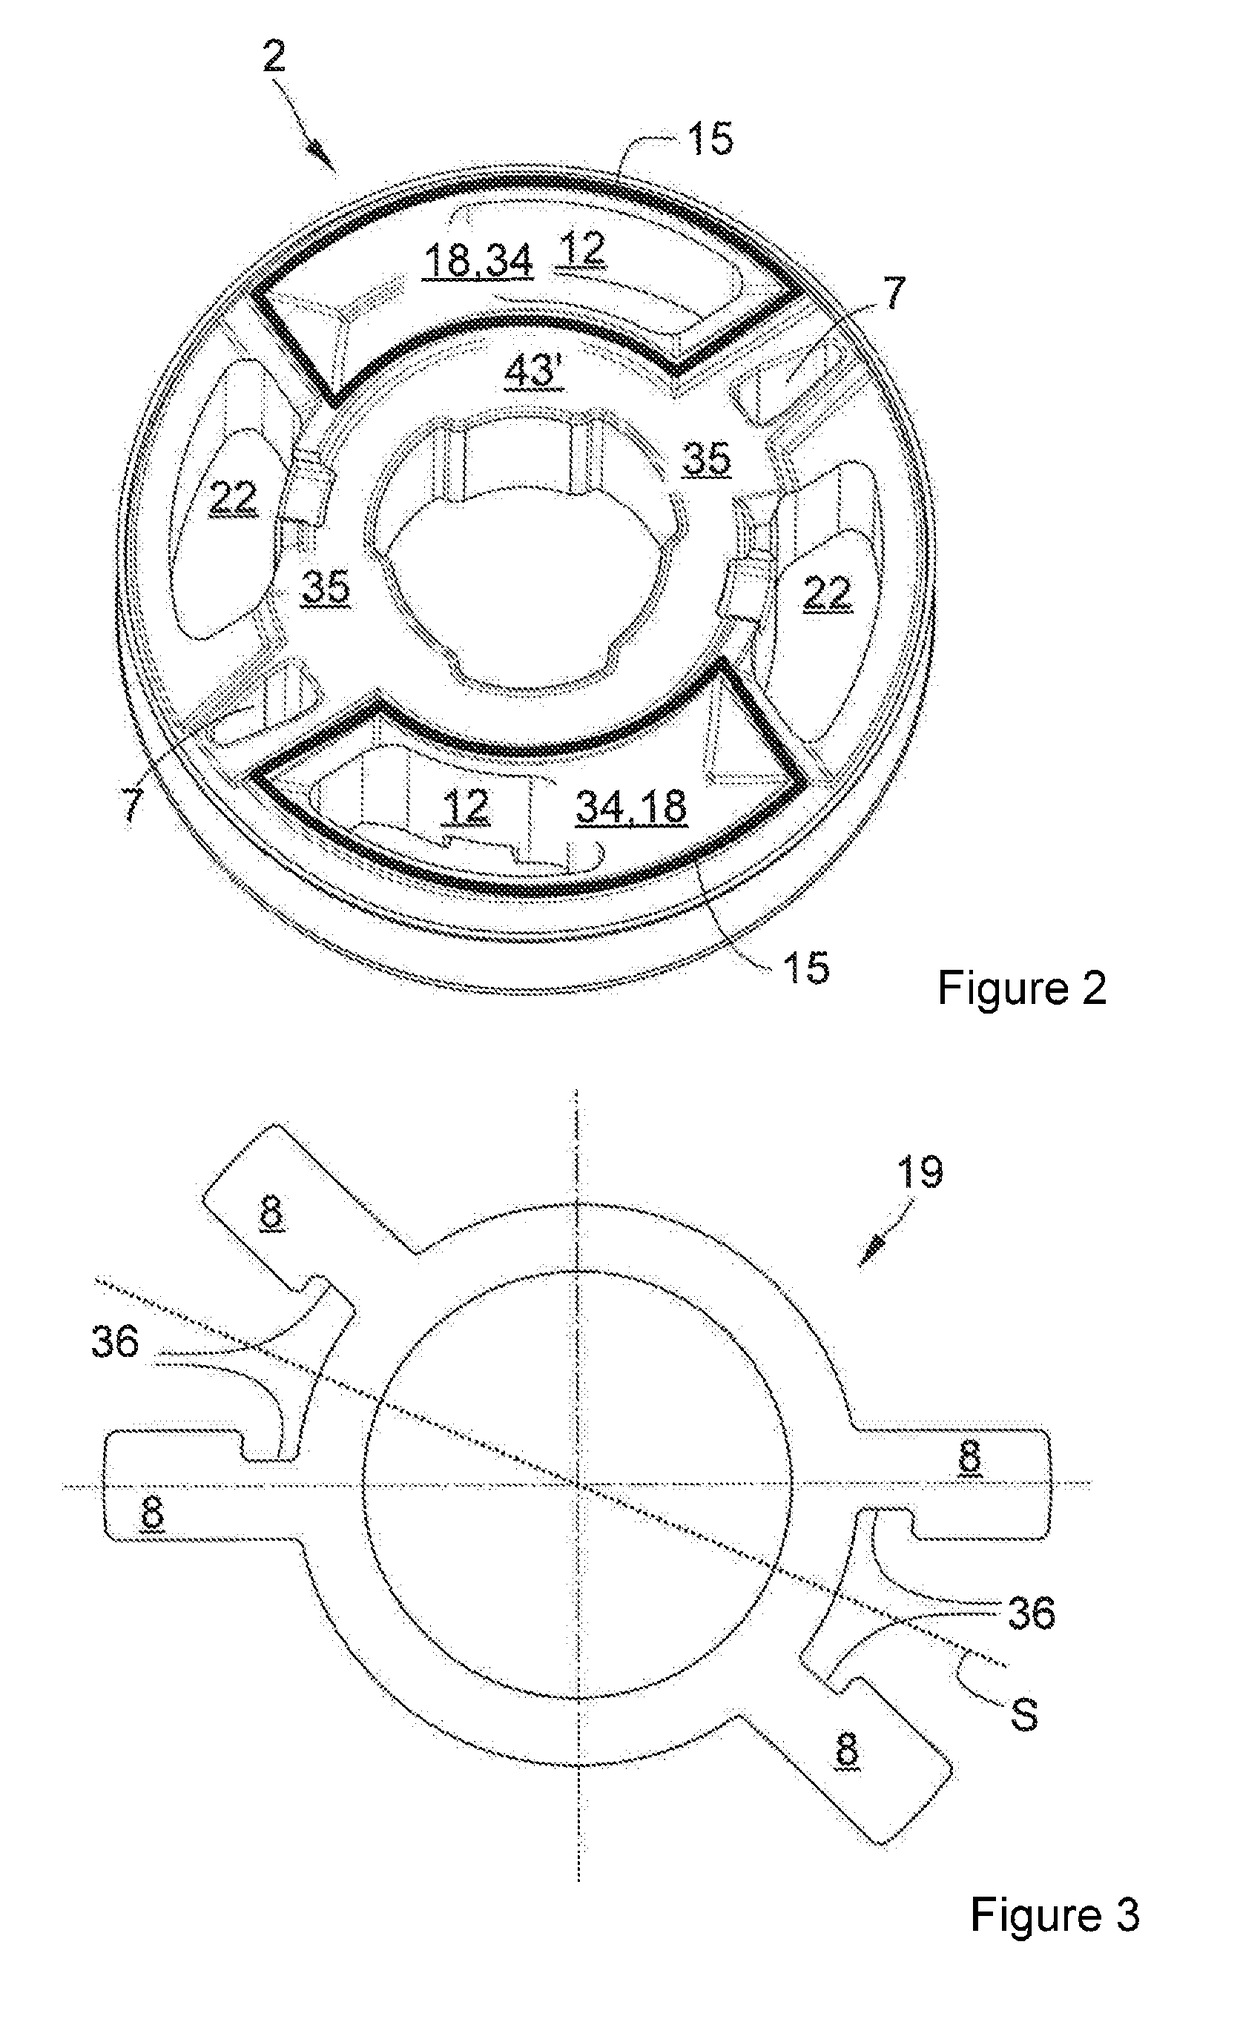 Controllable shock absorber for motor vehicles